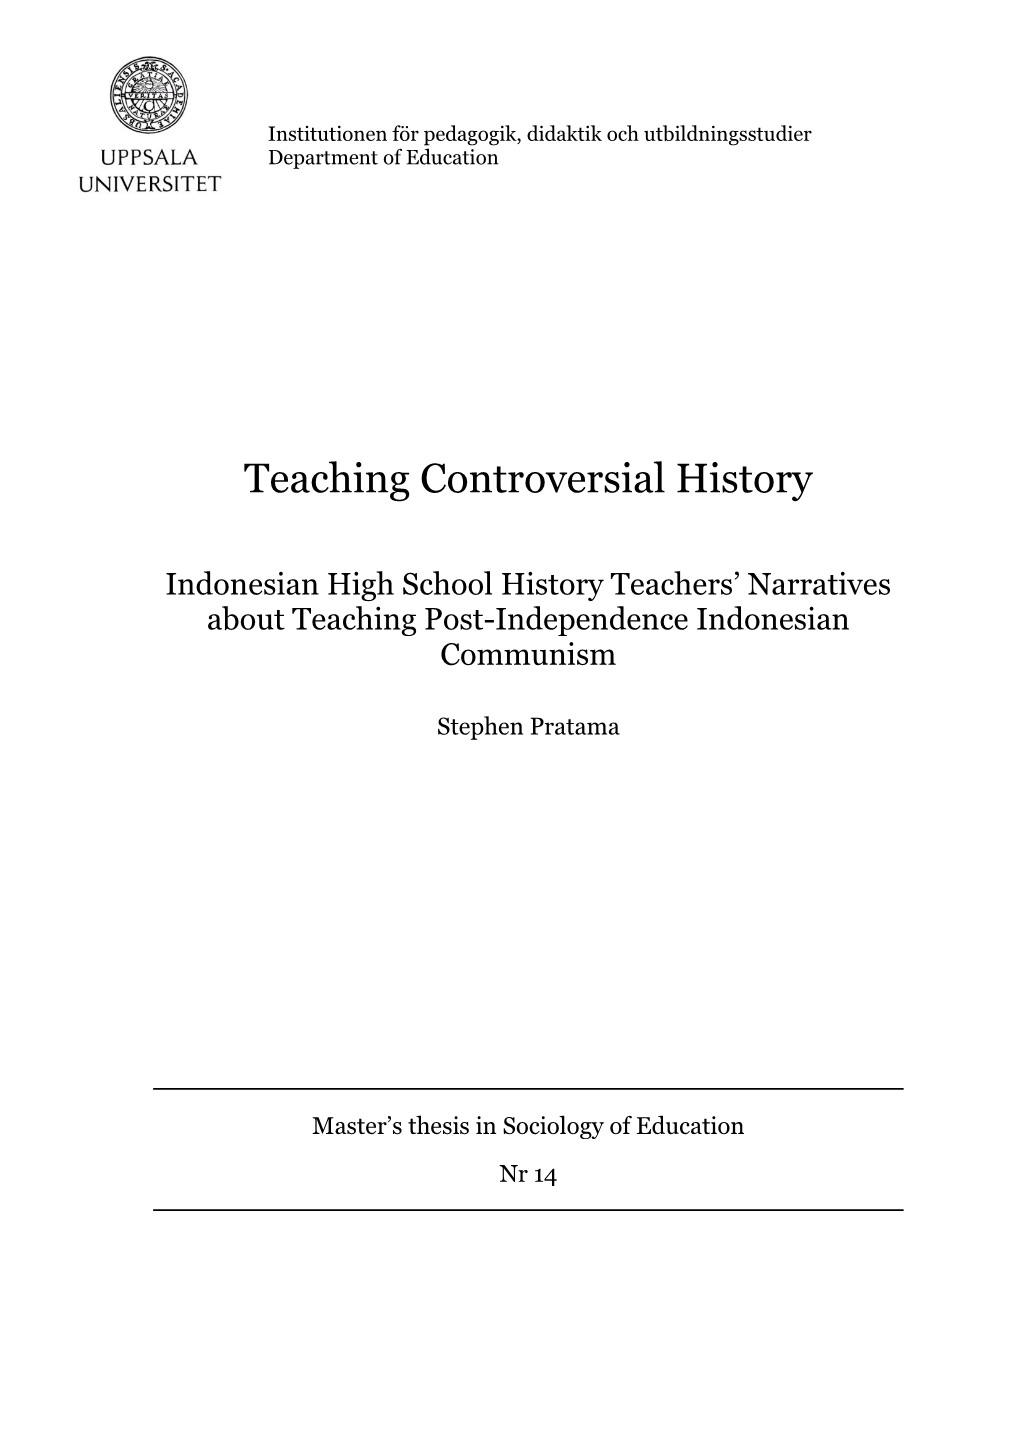 Teaching Controversial History